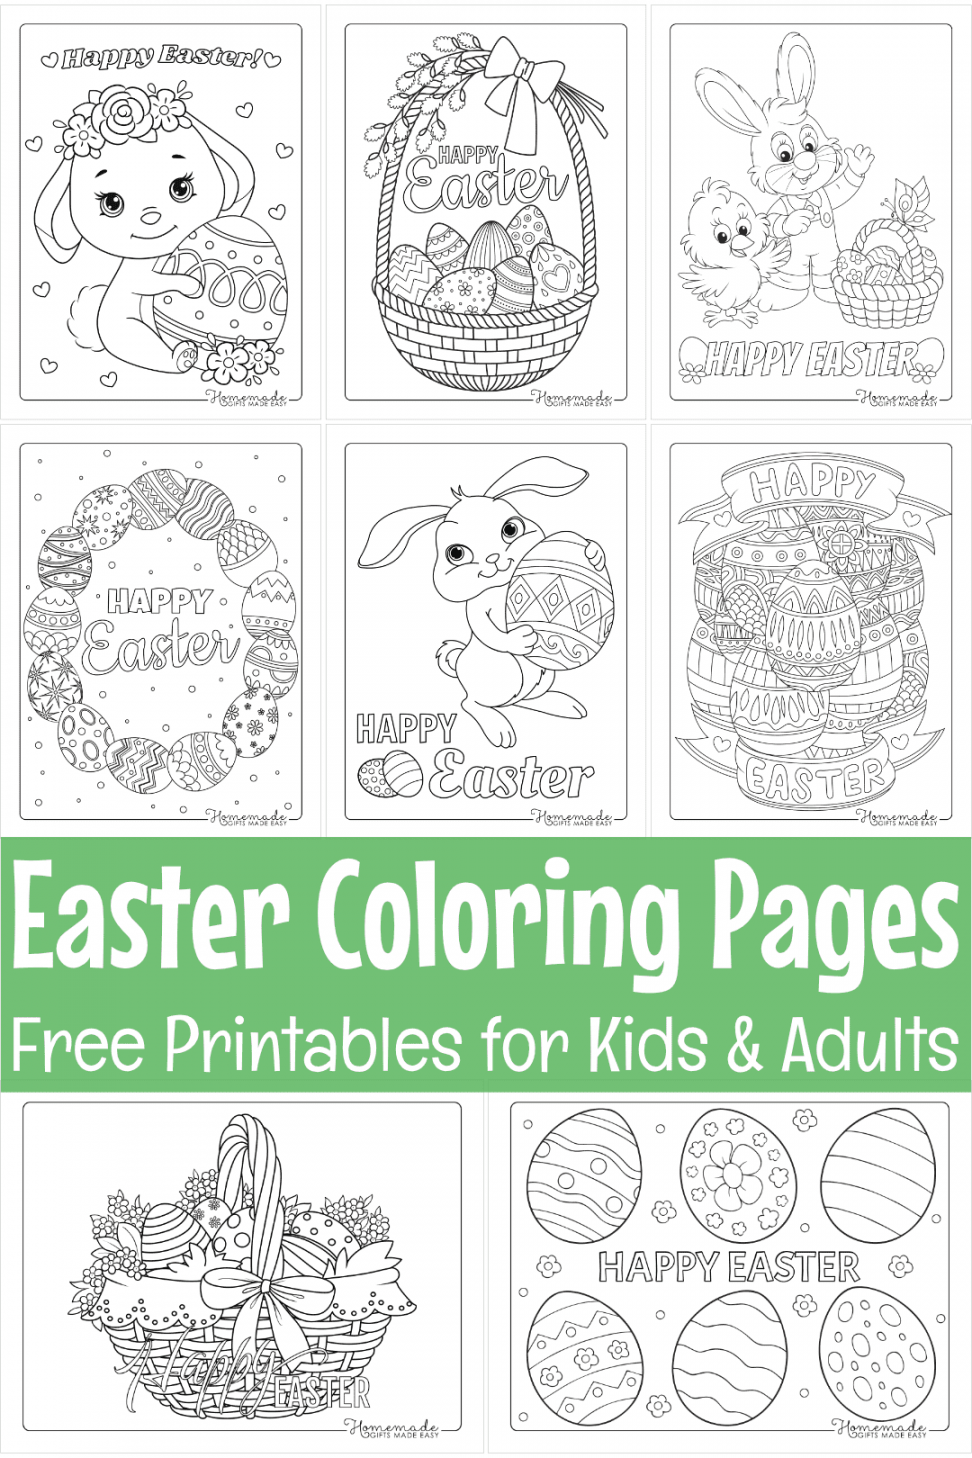 Free Printables For Easter - Printable - Free Easter Coloring Pages for Kids & Adults